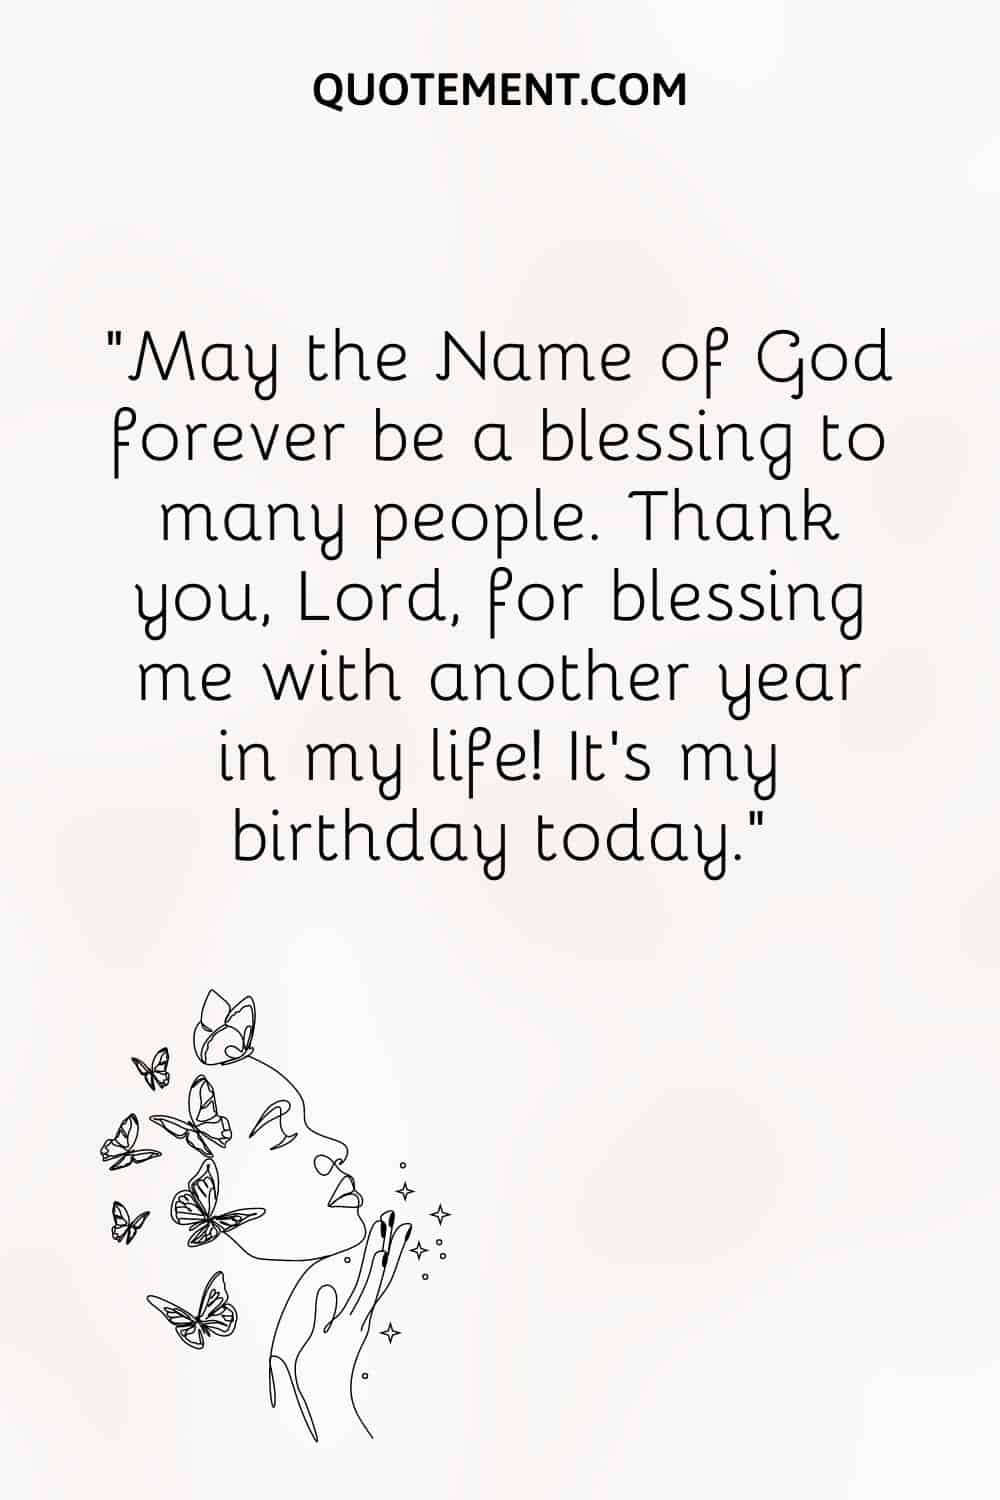 May the Name of God forever be a blessing to many people